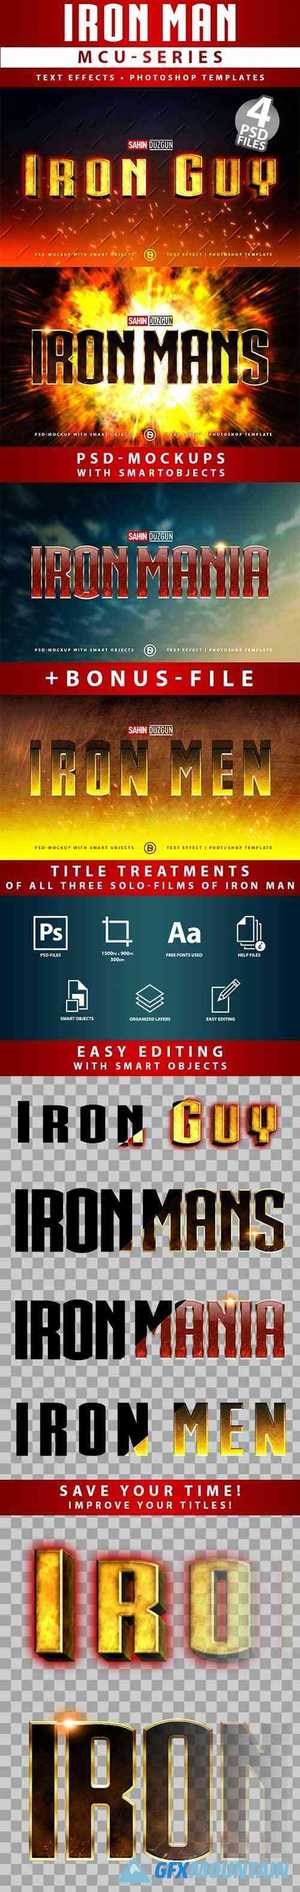 IRON MAN - MCU-Film Series | Text-Effects/Mockups | Template-Package 26615003